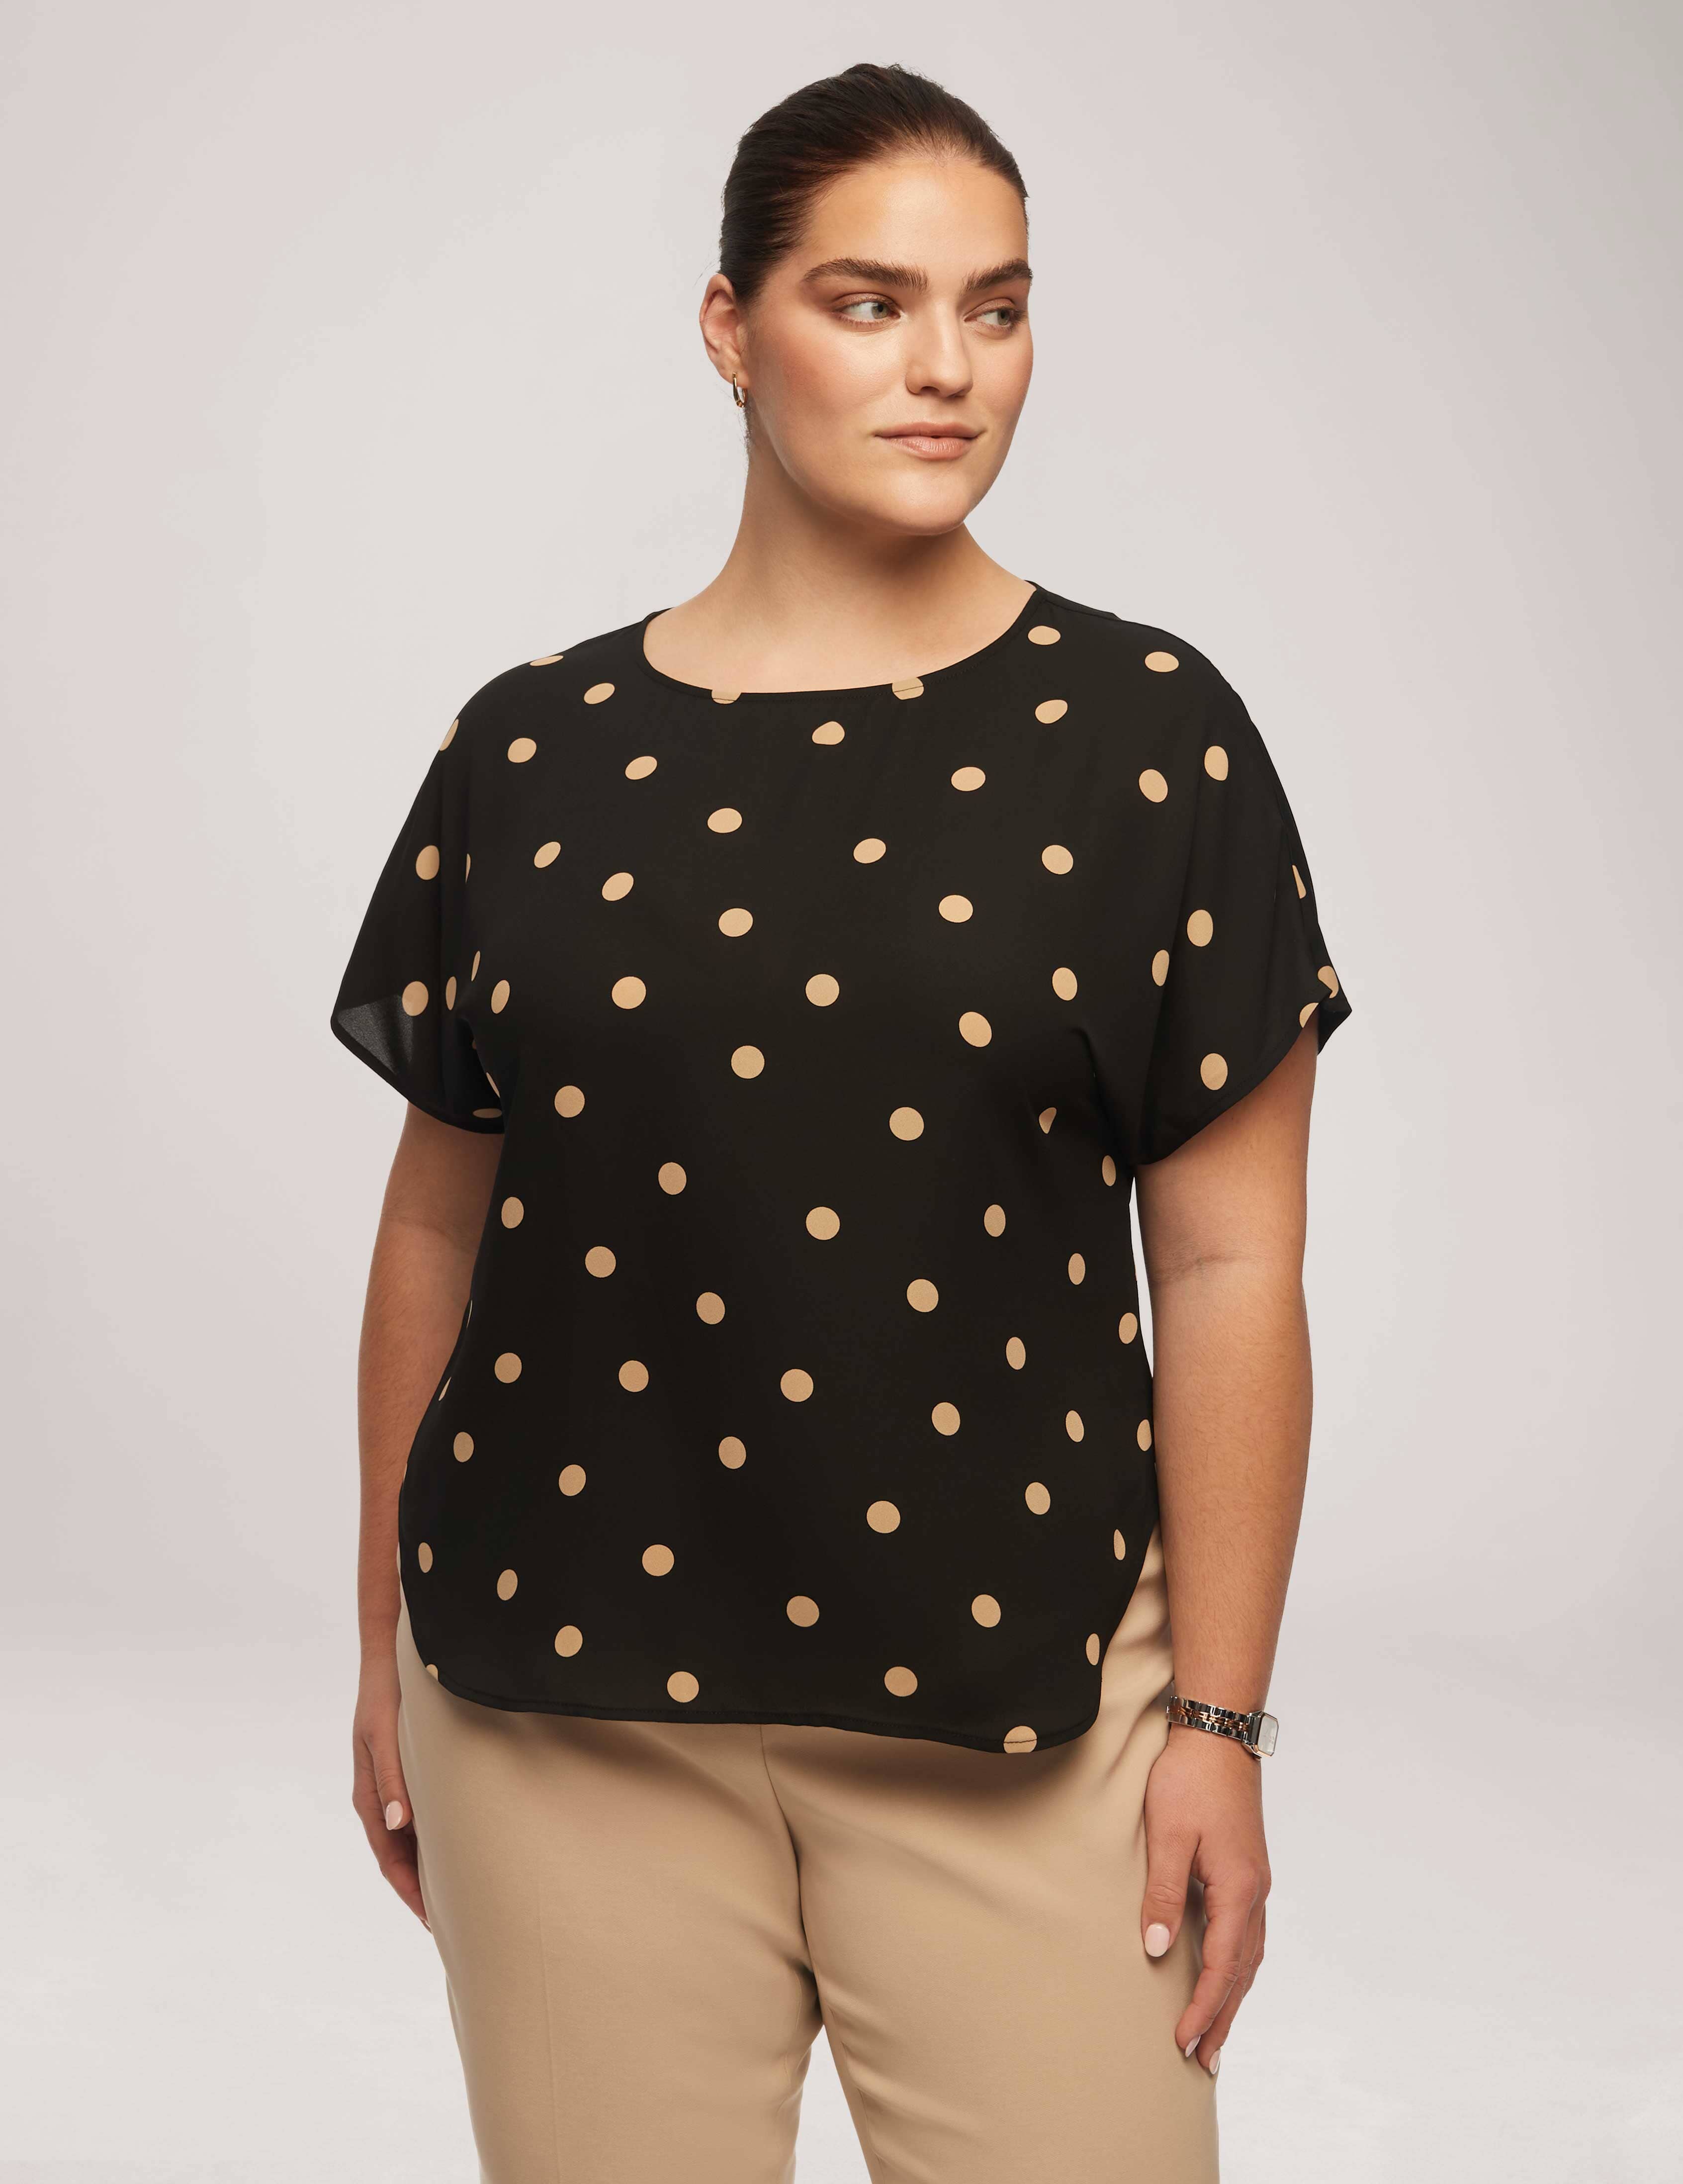 JanQ - Short-Sleeve Square Neck Dotted Blouse